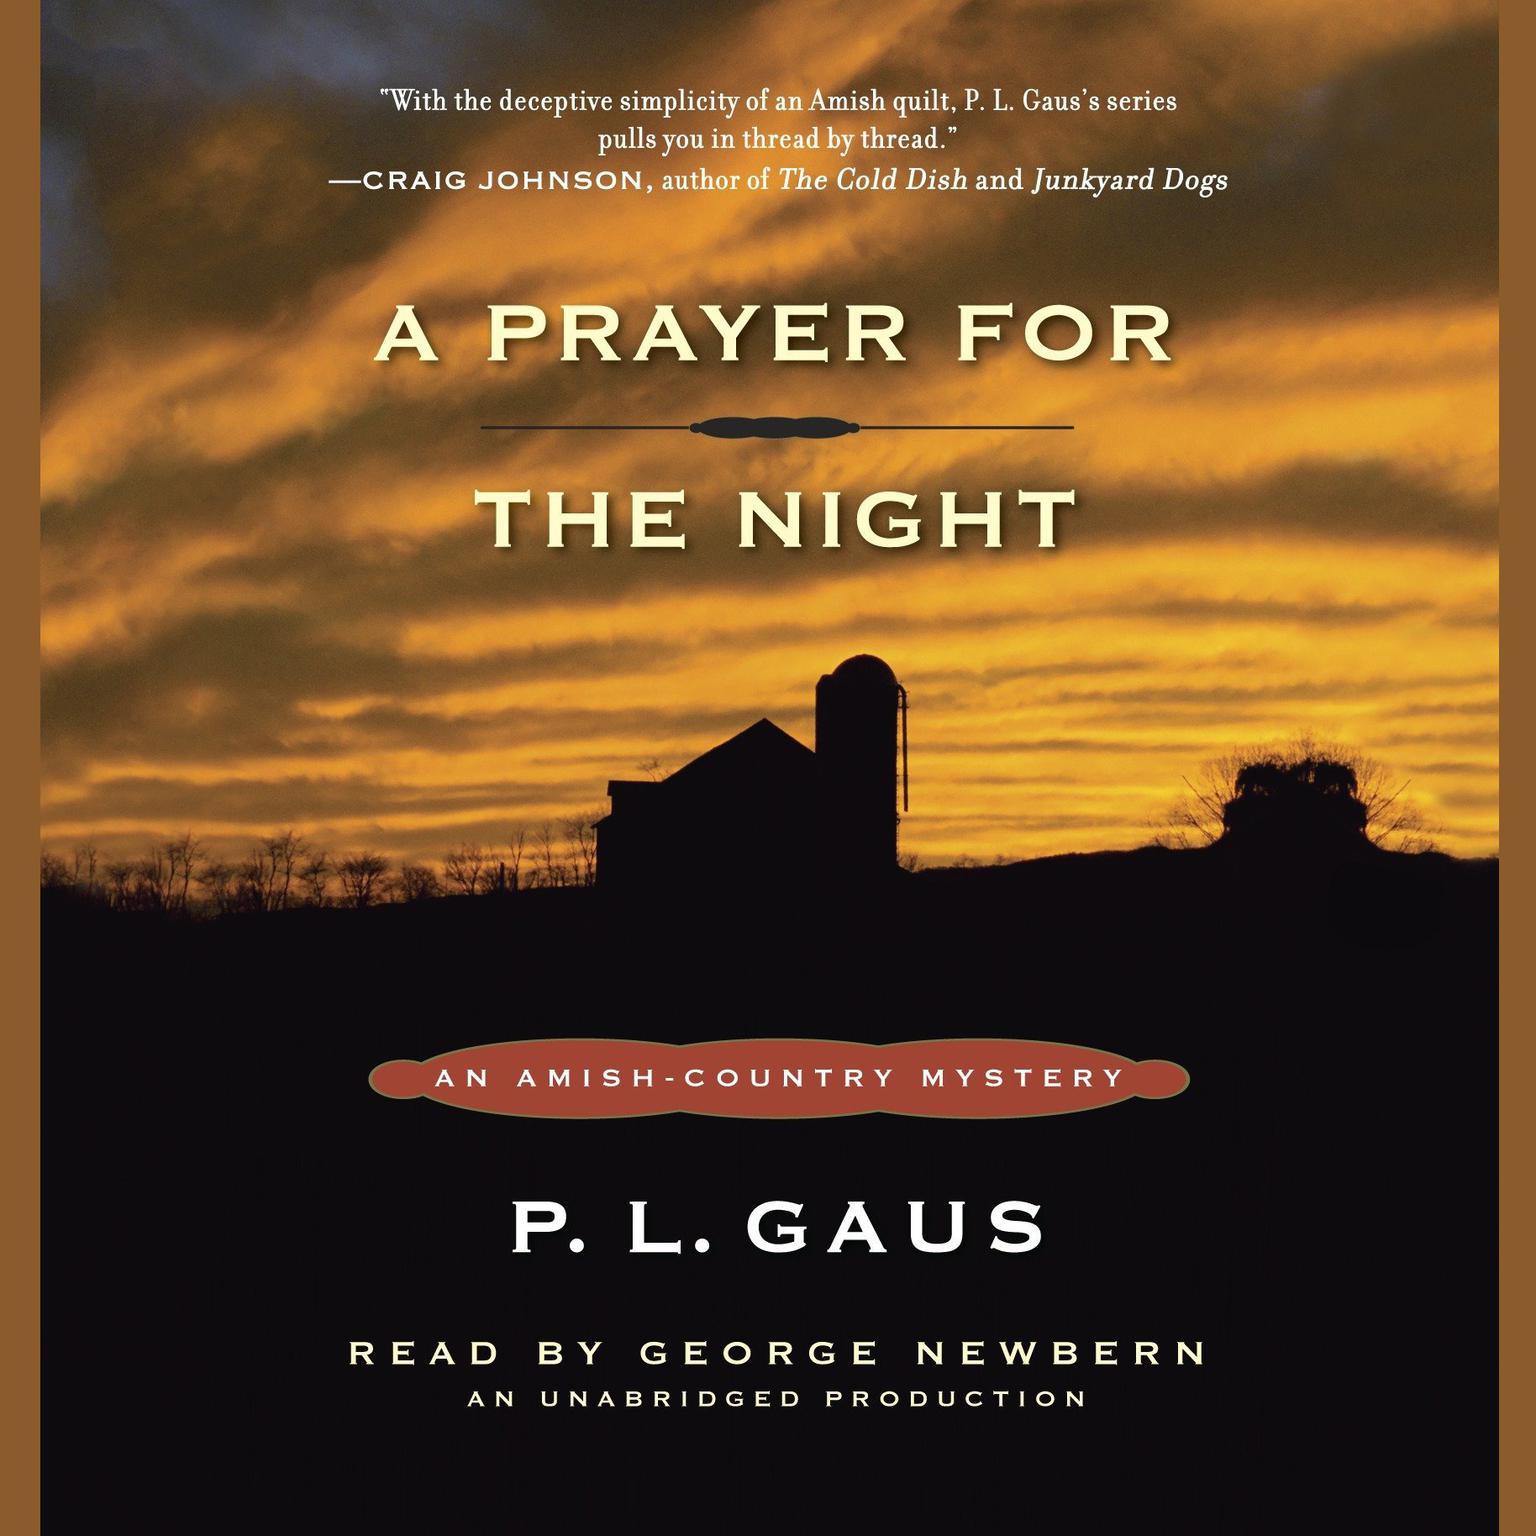 A Prayer for the Night: An Amish-Country Mystery (#5) Audiobook, by P. L. Gaus